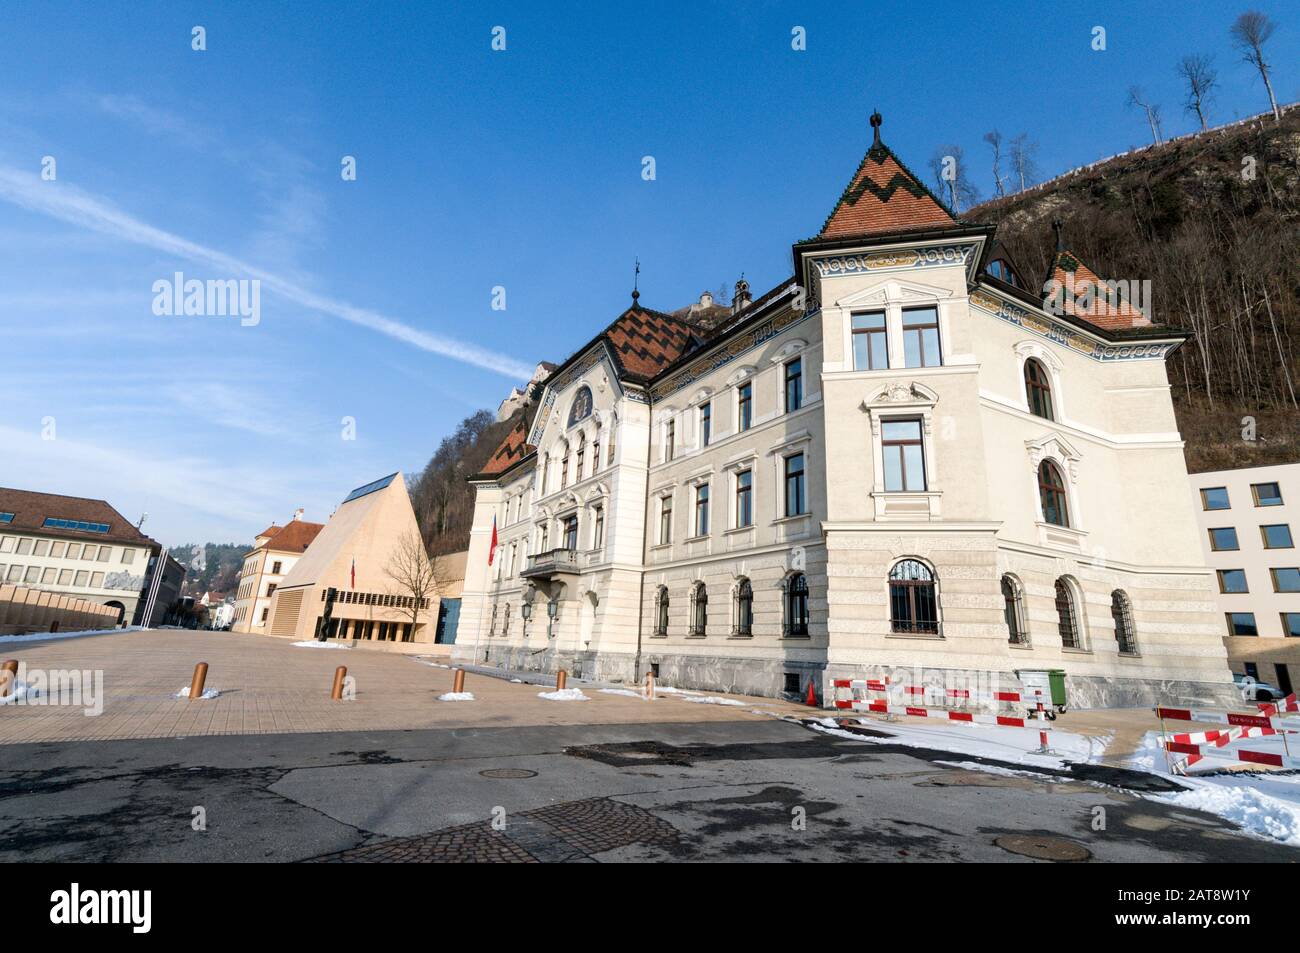 The Prime Minister's office and government departments  in Stadtle, the pedestrianized city center in Vaduz, Liechtenstein. further down is the Liecht Stock Photo